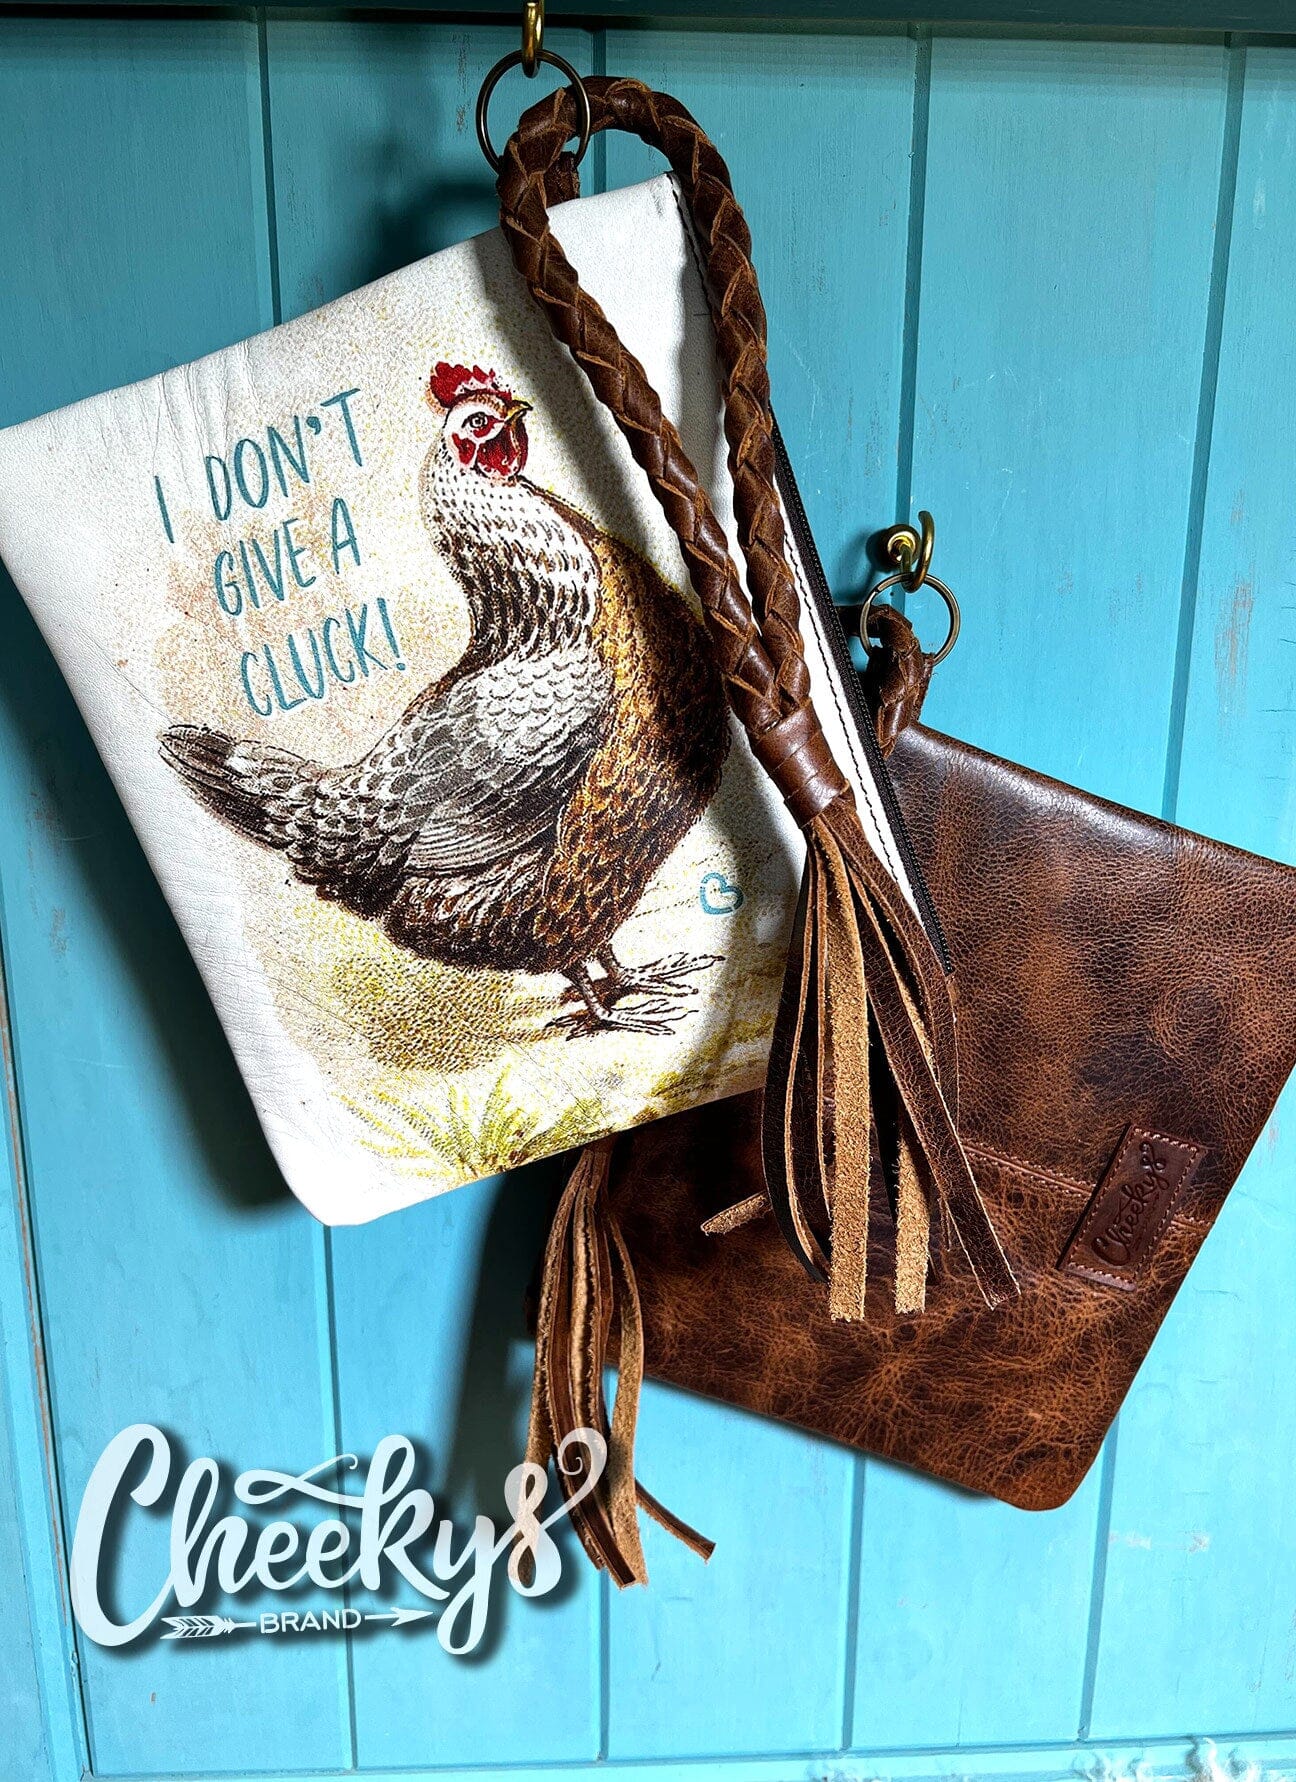 I Don't Give A Cluck Wristlet Cheekys Brand 